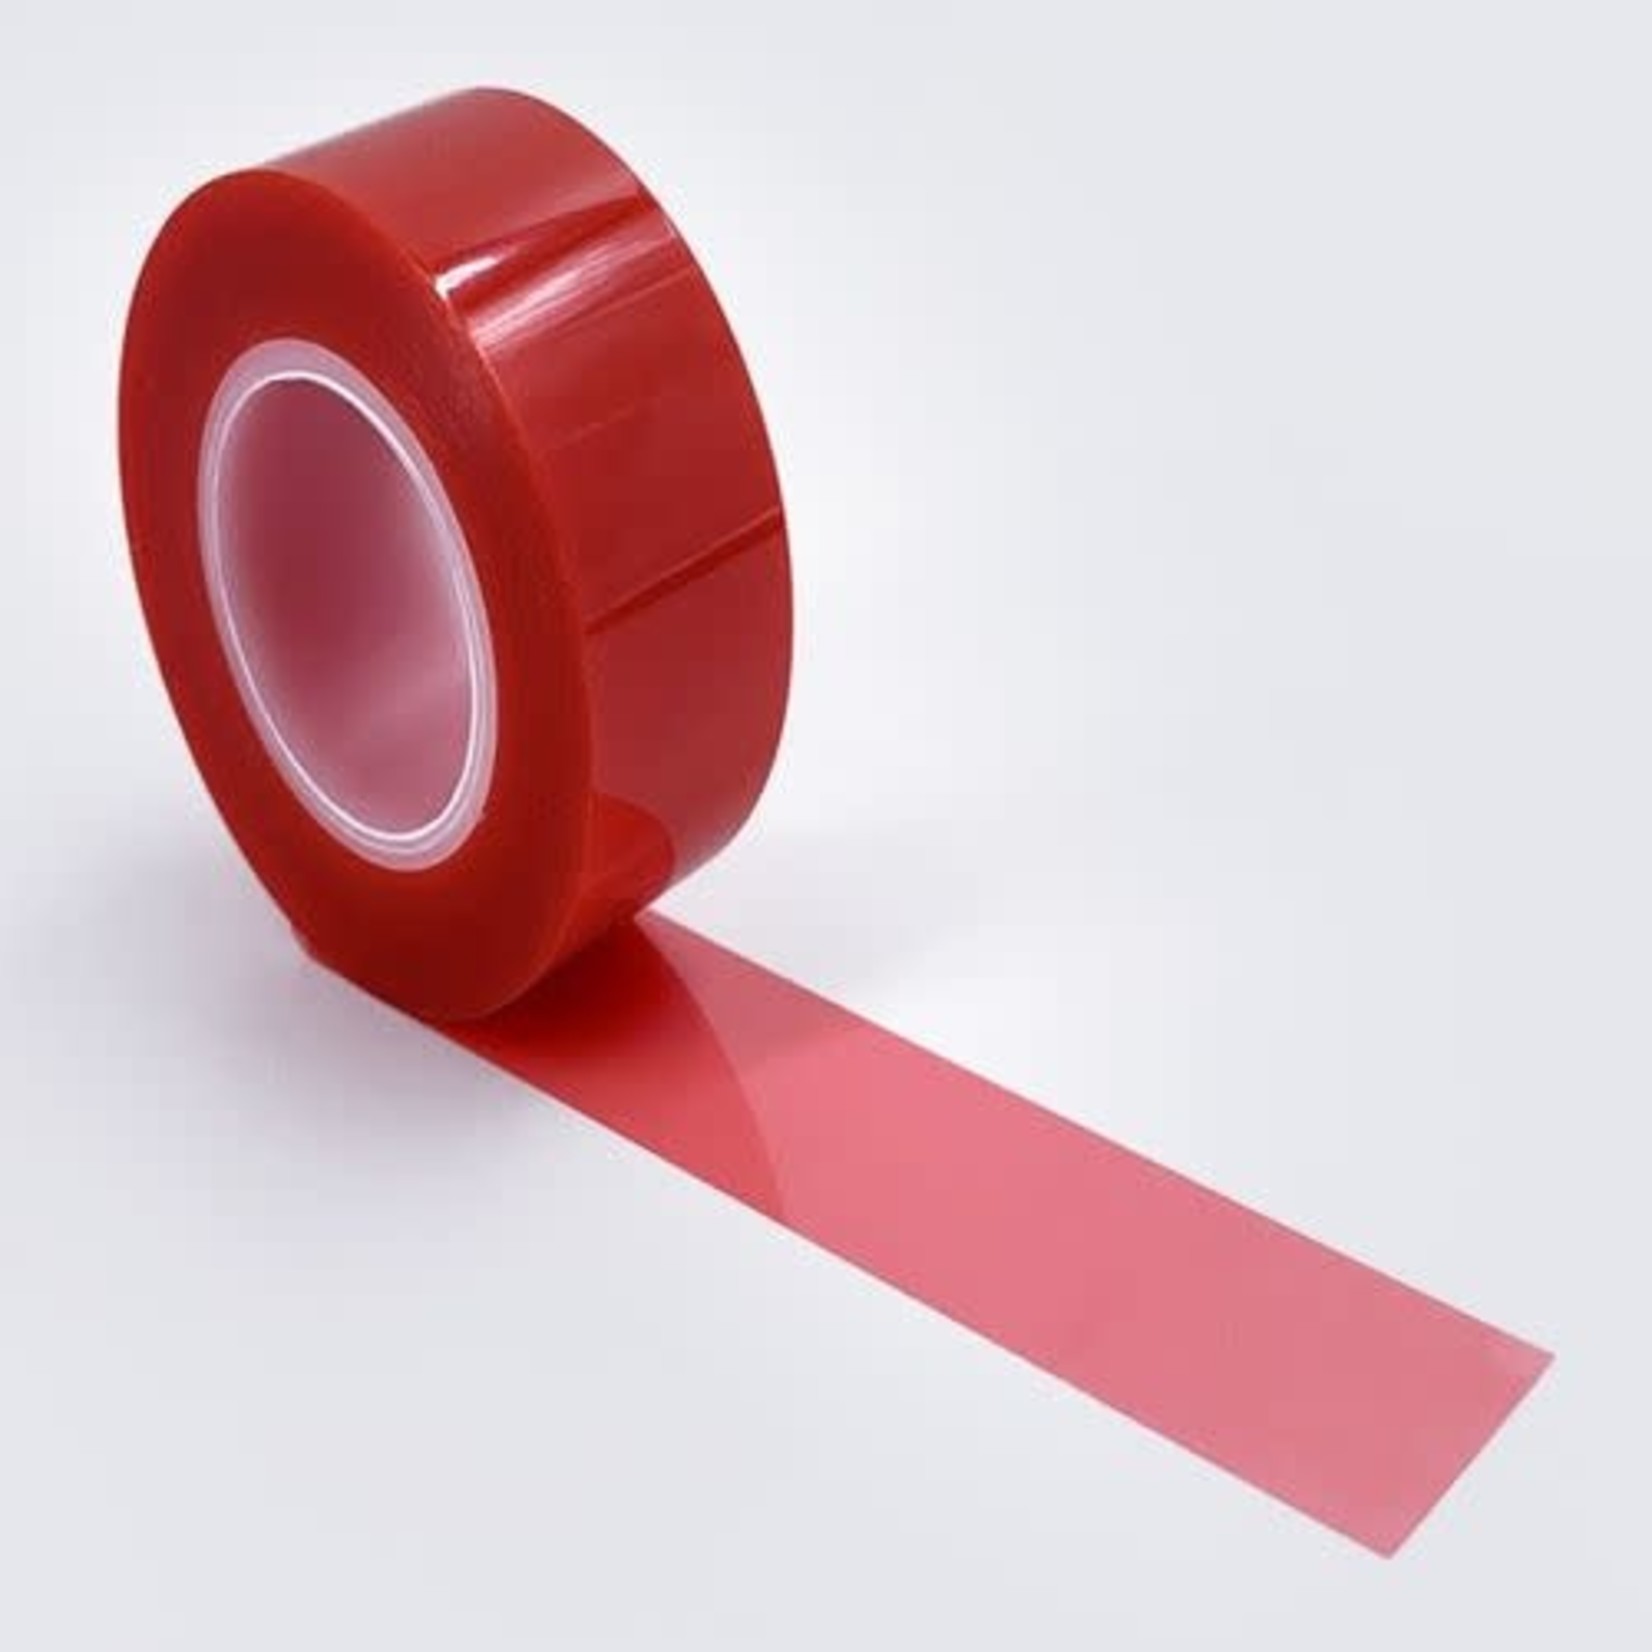 SISER thermo tape